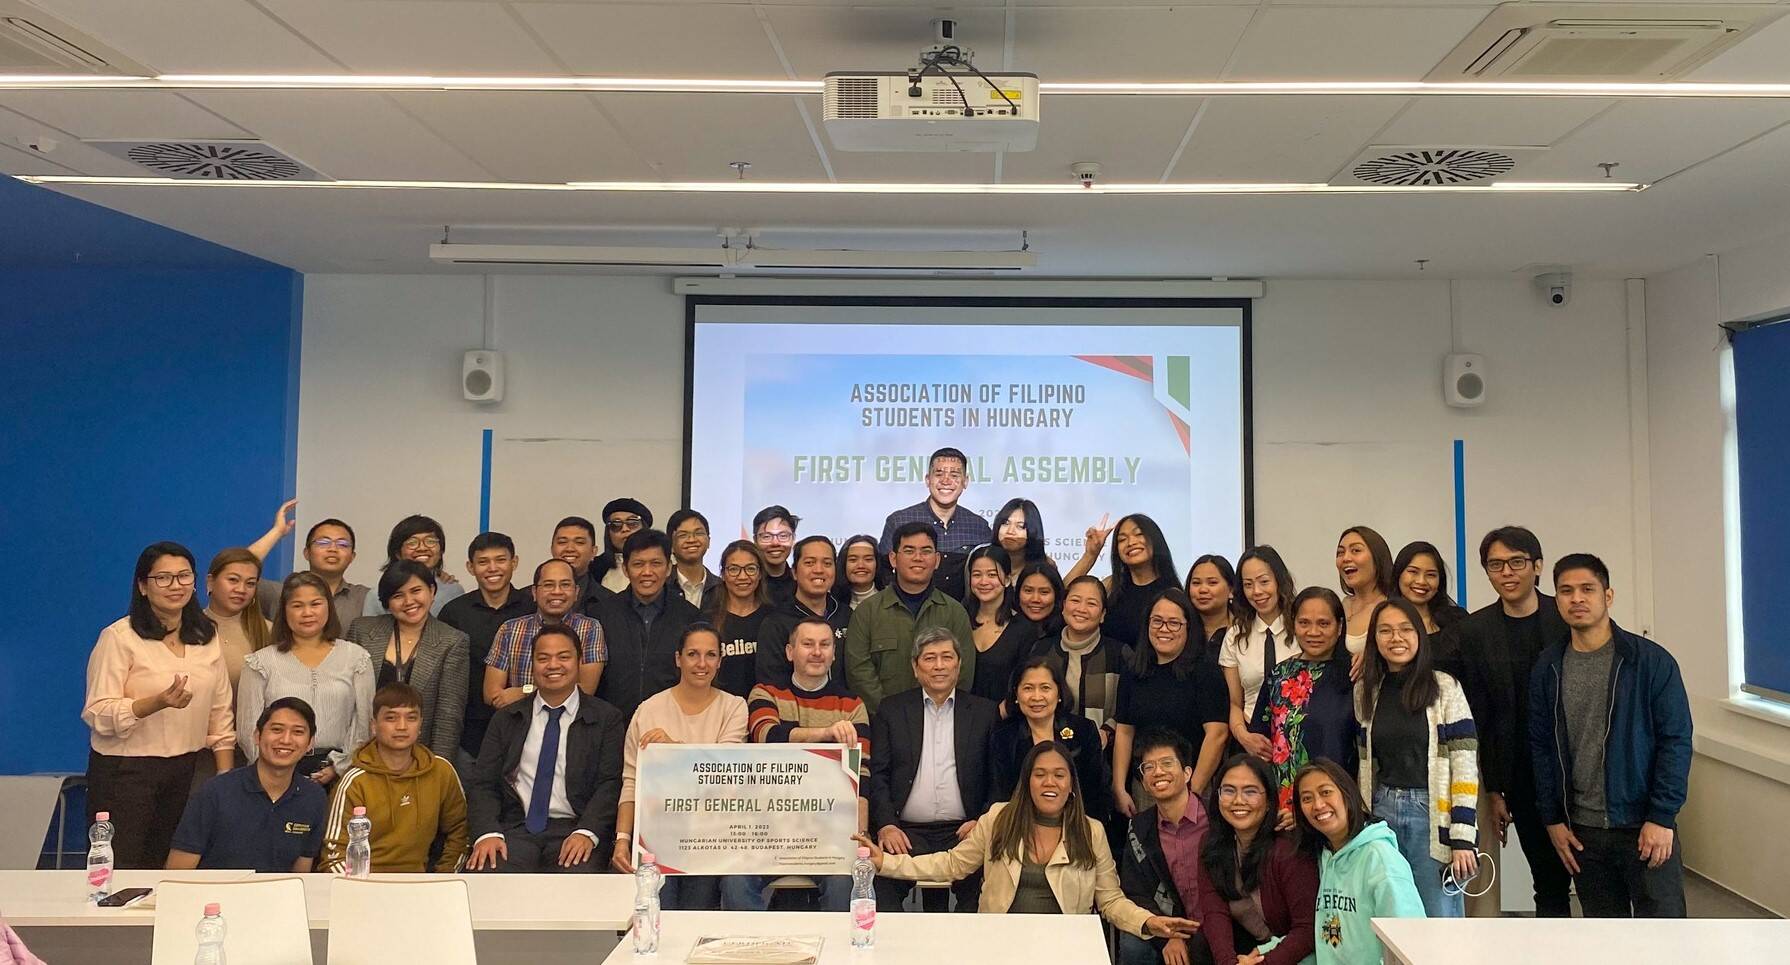 HUSS hosts the first General Assembly of the Association of Filipino Students in Hungary